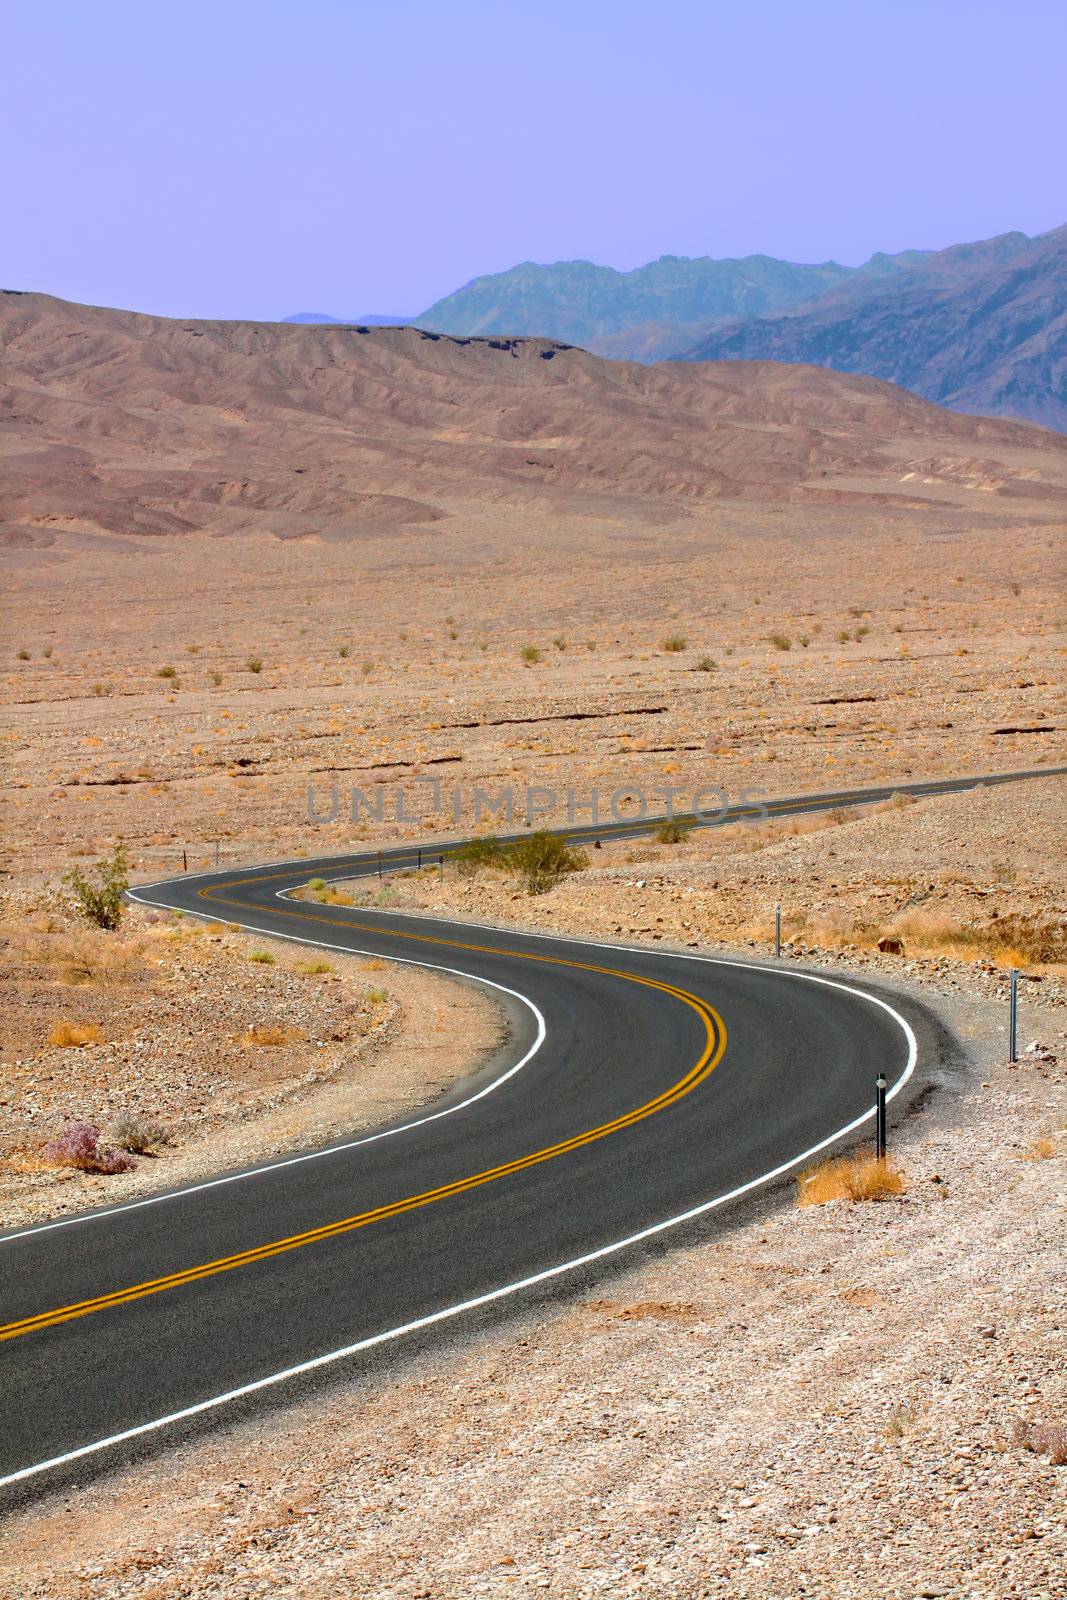 Long winding road through the hot deserts of Death Valley in California.